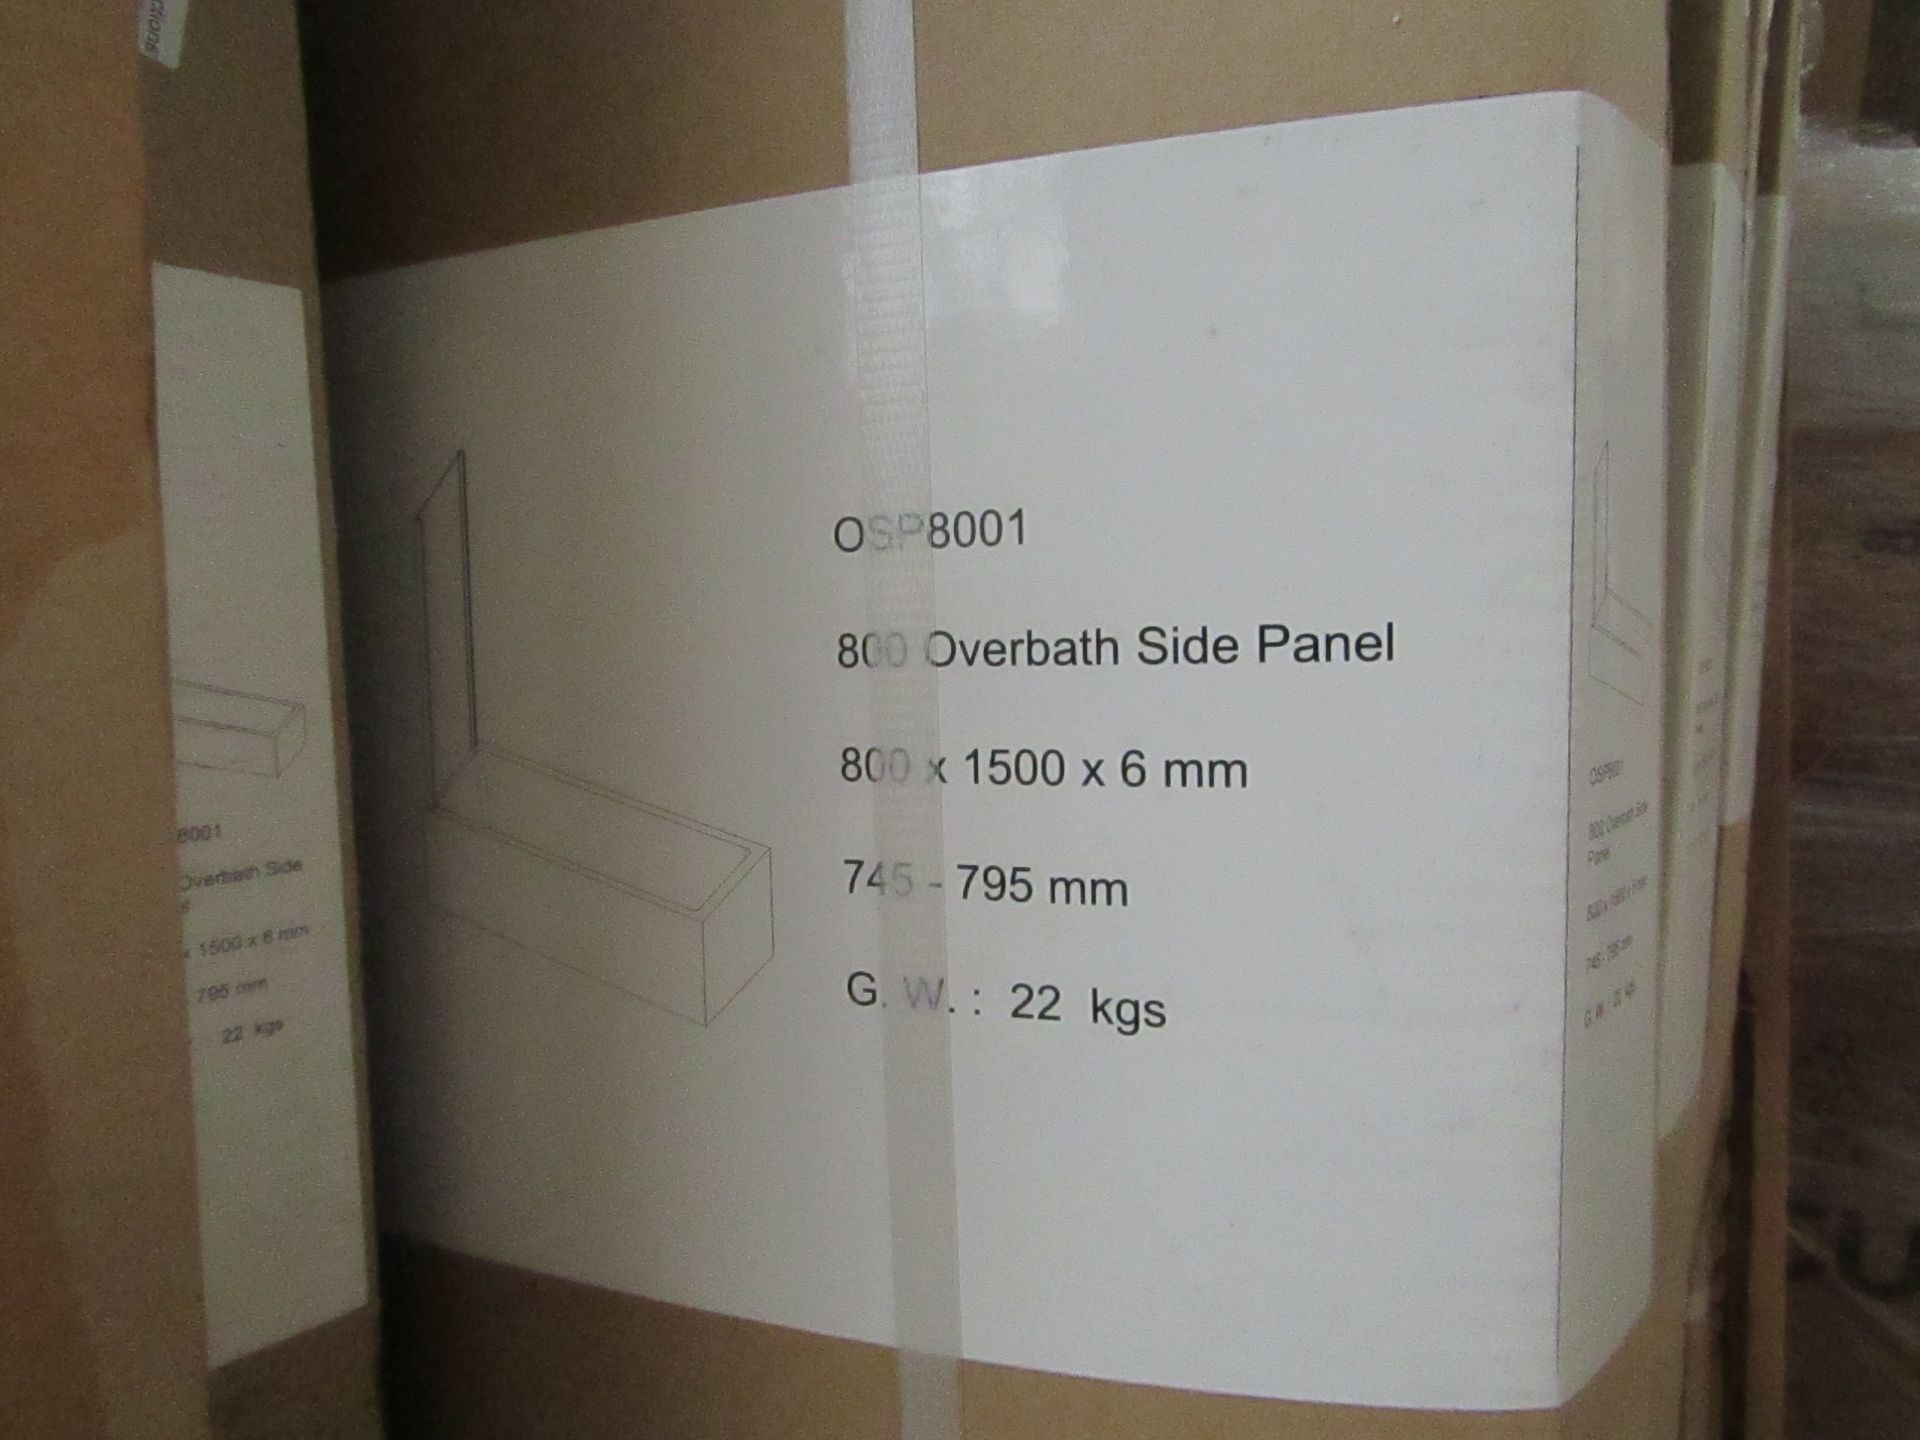 800 Overbath side panel, 800 x 1500 x 6mm, new and boxed. OSP8001